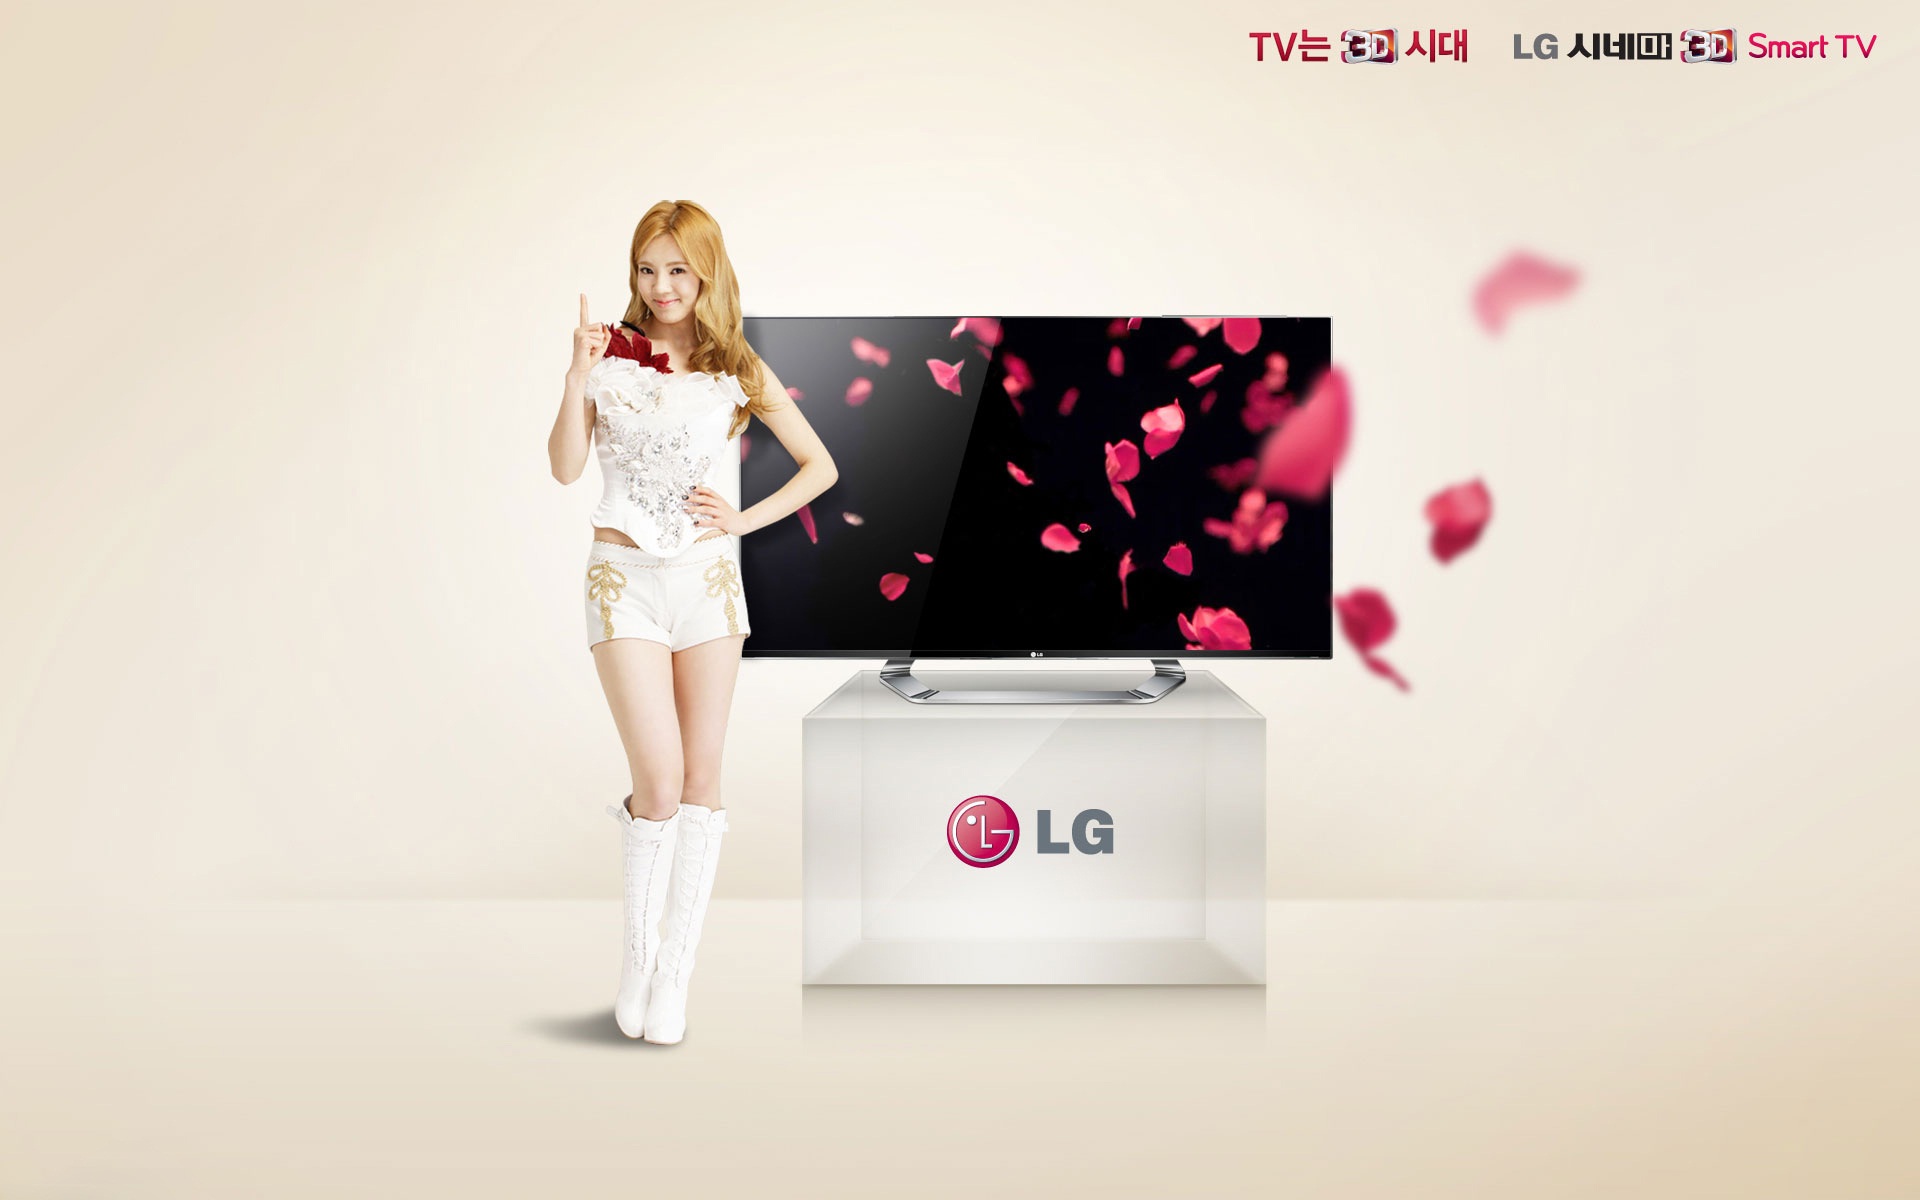 Girls Generation ACE and LG endorsements ads HD wallpapers #13 - 1920x1200